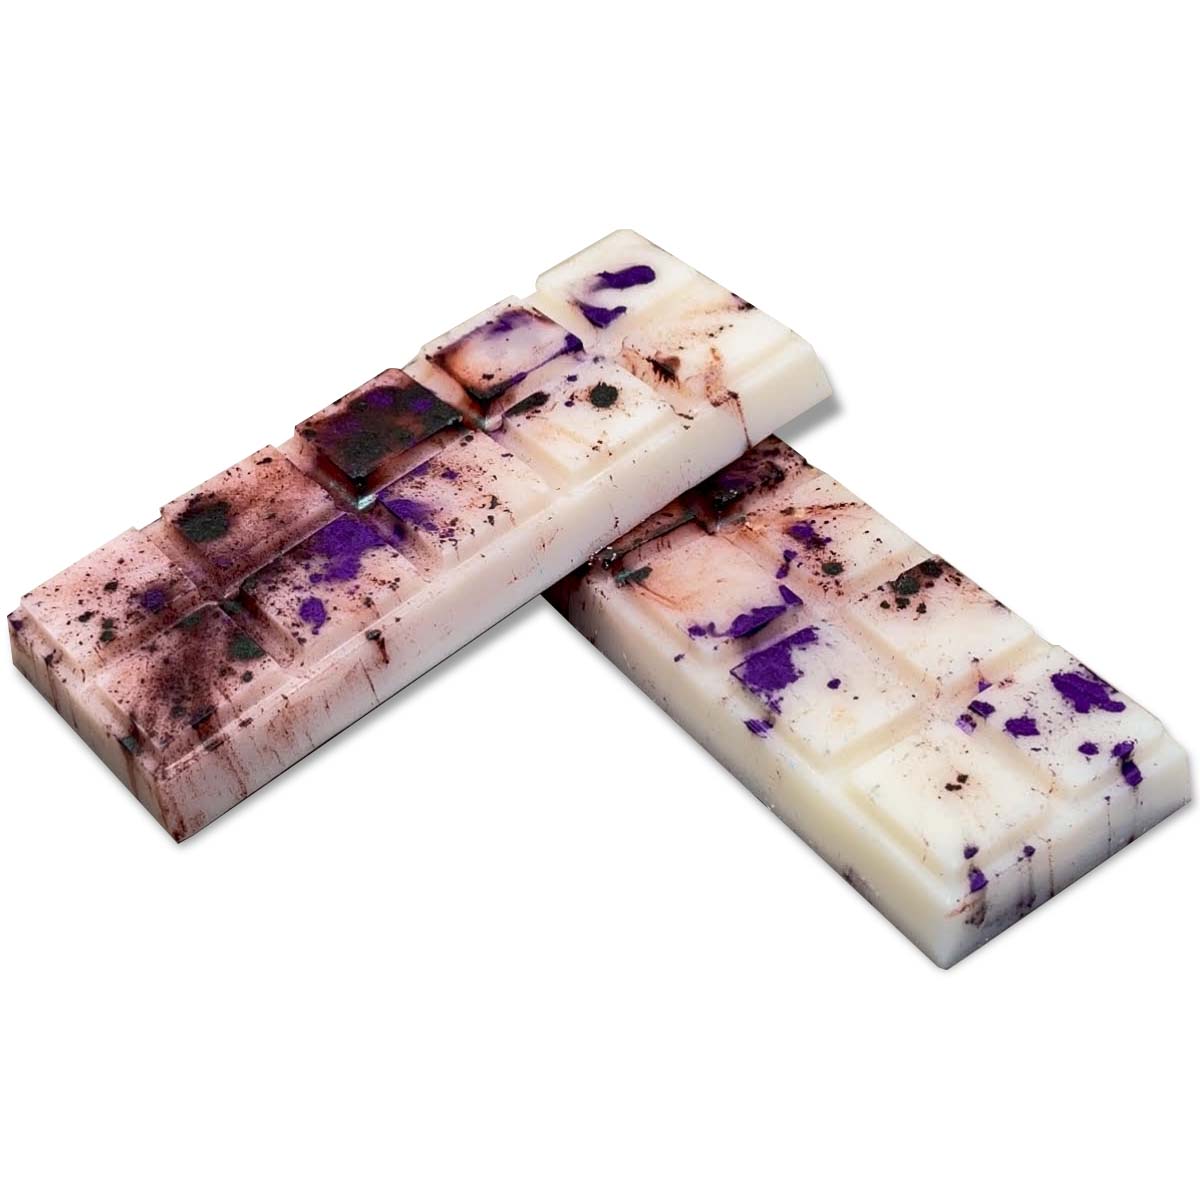 Experience the richness of our unwrapped Velvet Peony and Oud Snap Bar. Its natural soy wax fills your space with a blend of floral and woody scents.